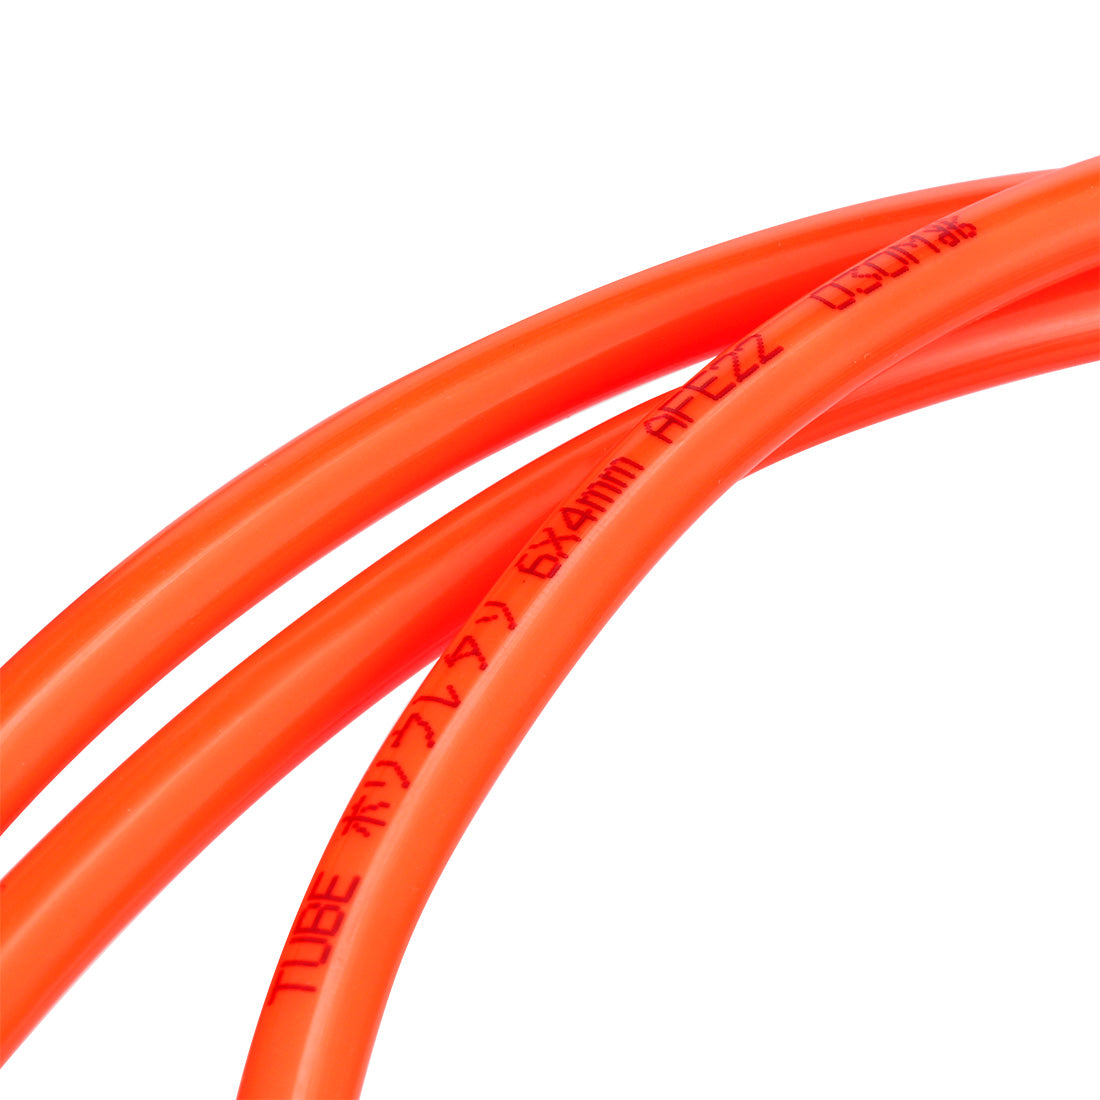 uxcell Uxcell 6mm X 4mm Pneumatic Air PU Hose Pipe Tube 5 Meter 16.4ft Orange